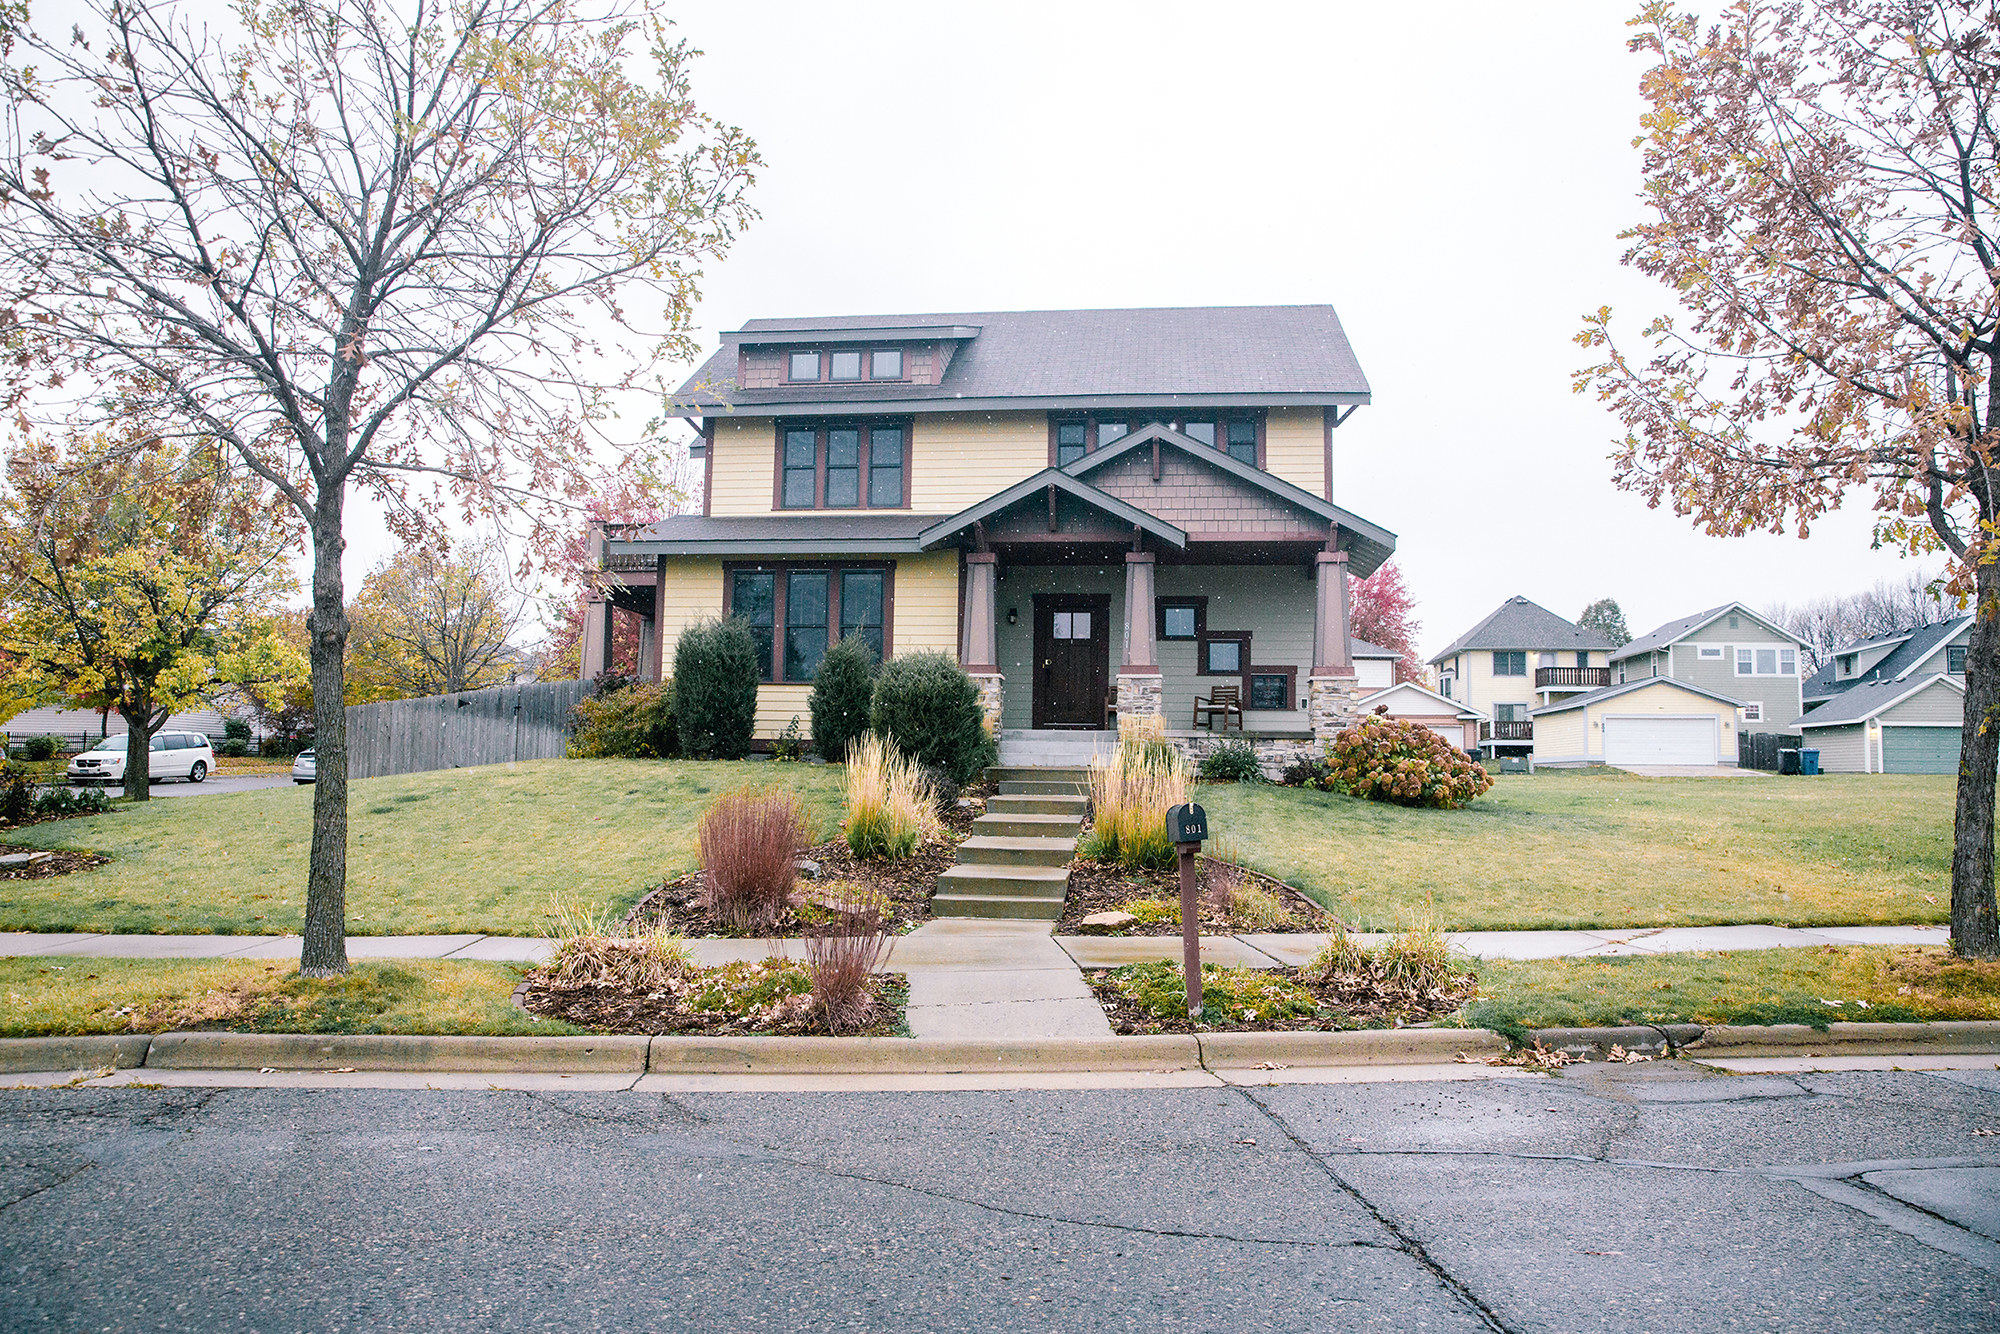 A well-kept house in North Minneapolis